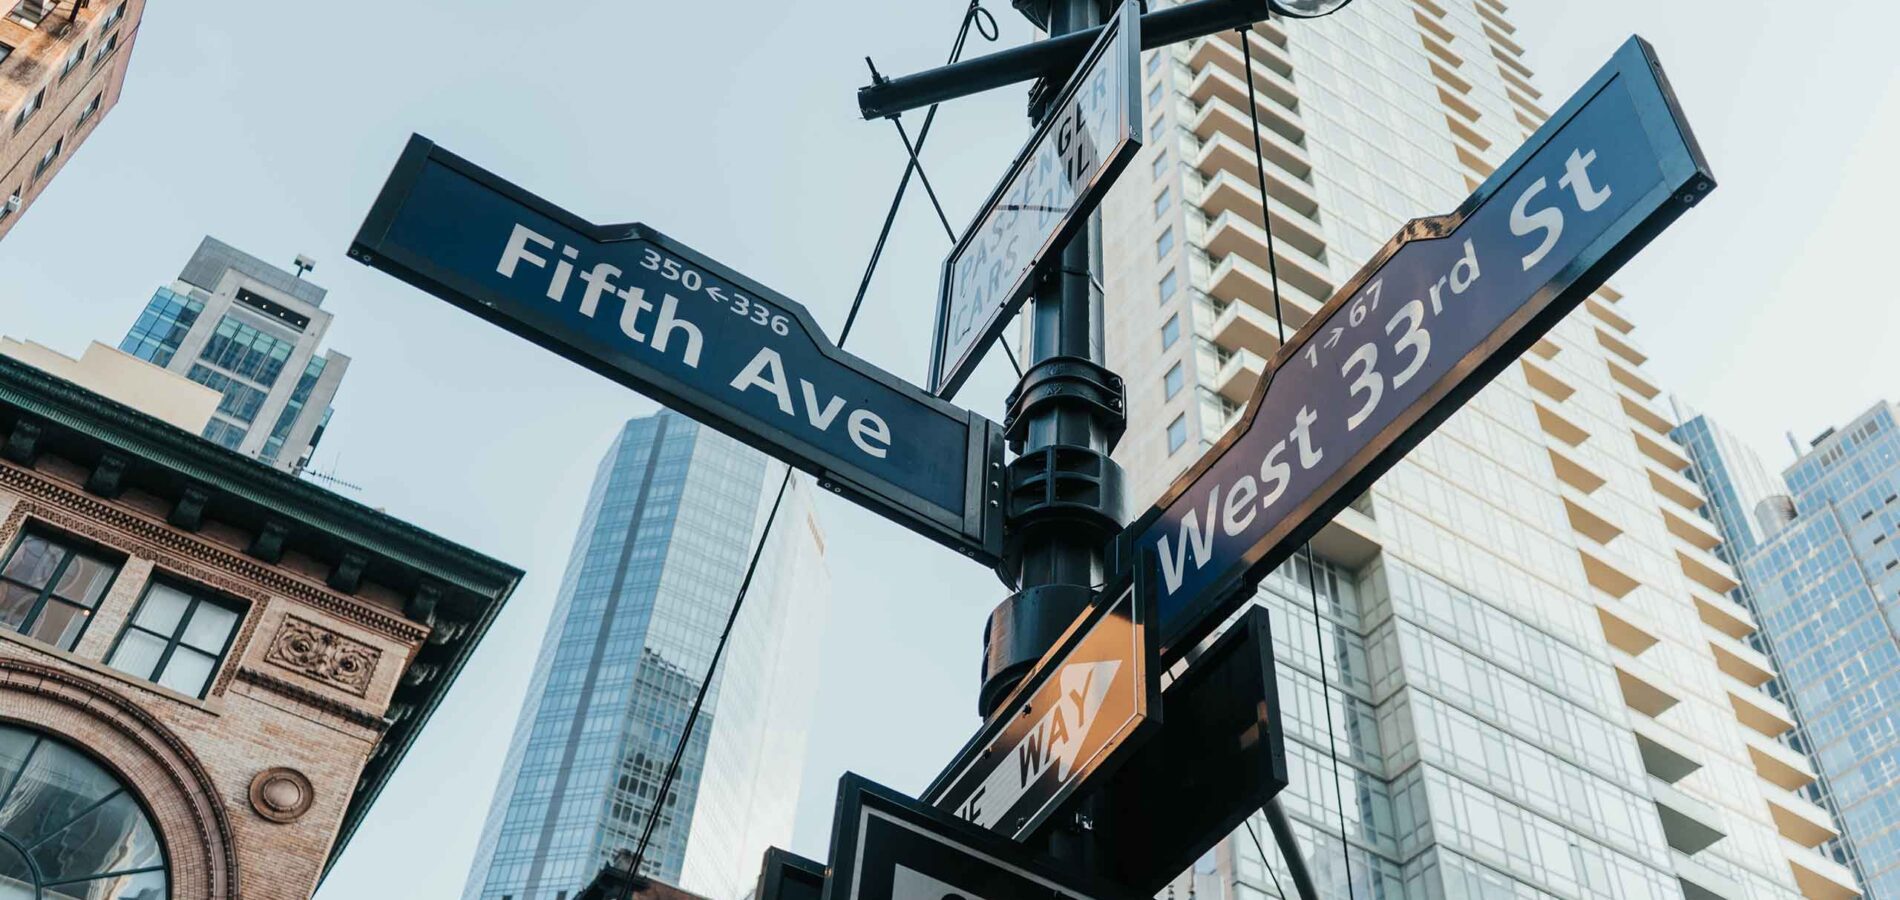 Fifth Avenue NYC Photo by Jose Oh on Unsplash